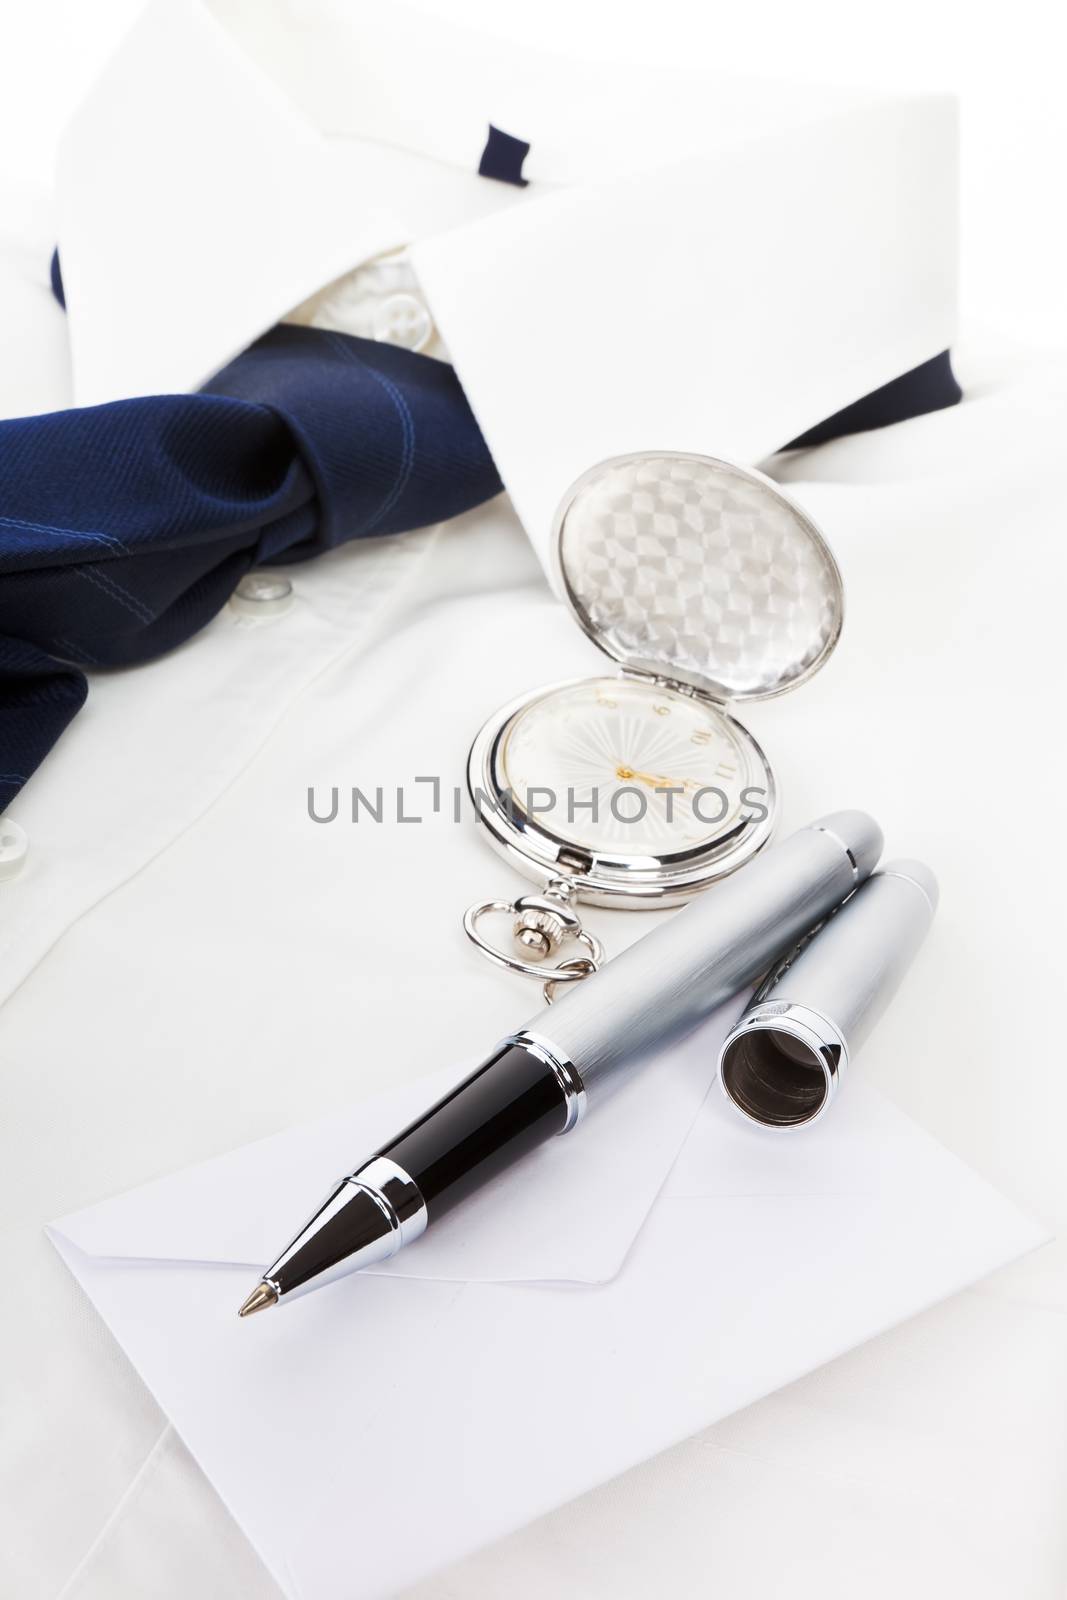 Elegant business still life with white dress shirt, blue tie, pen, envelope and silver pocket watch. Business concept.